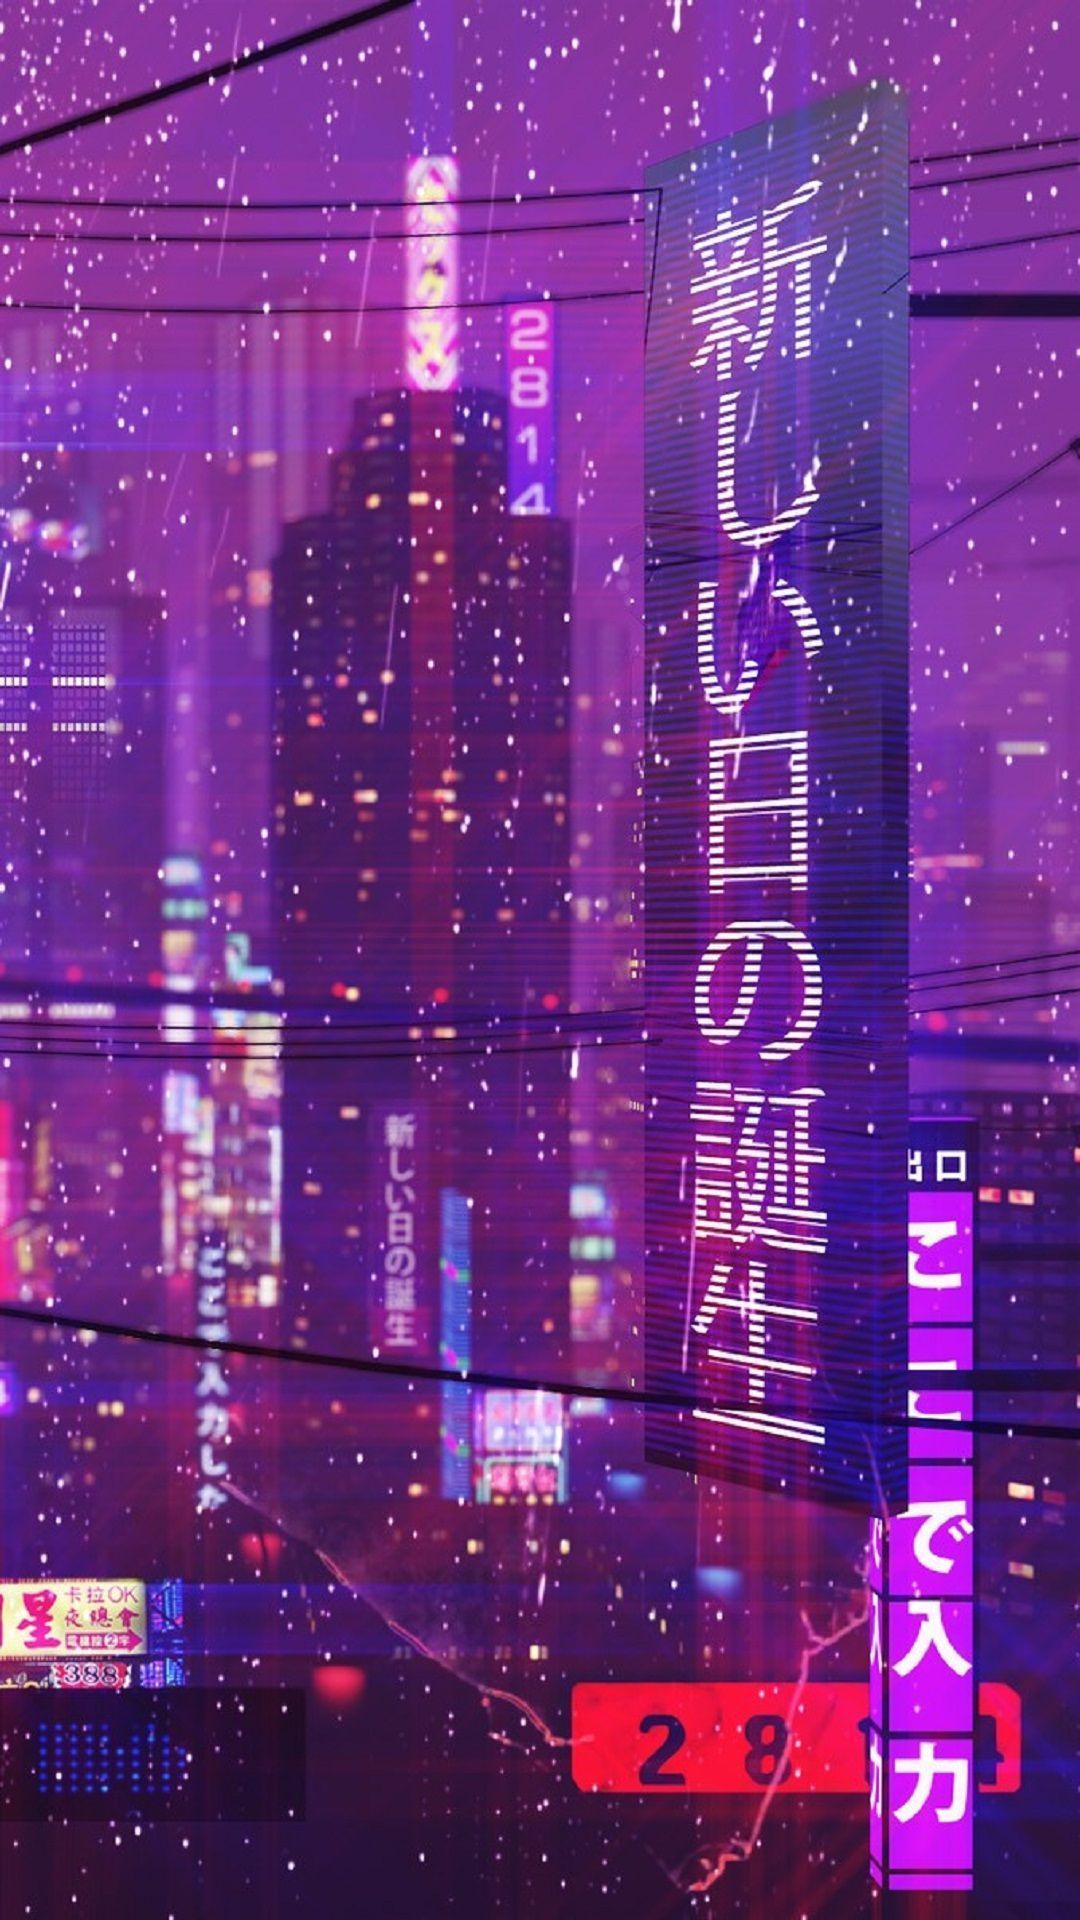 A city at night with neon lights and asian characters - 80s, Cyberpunk